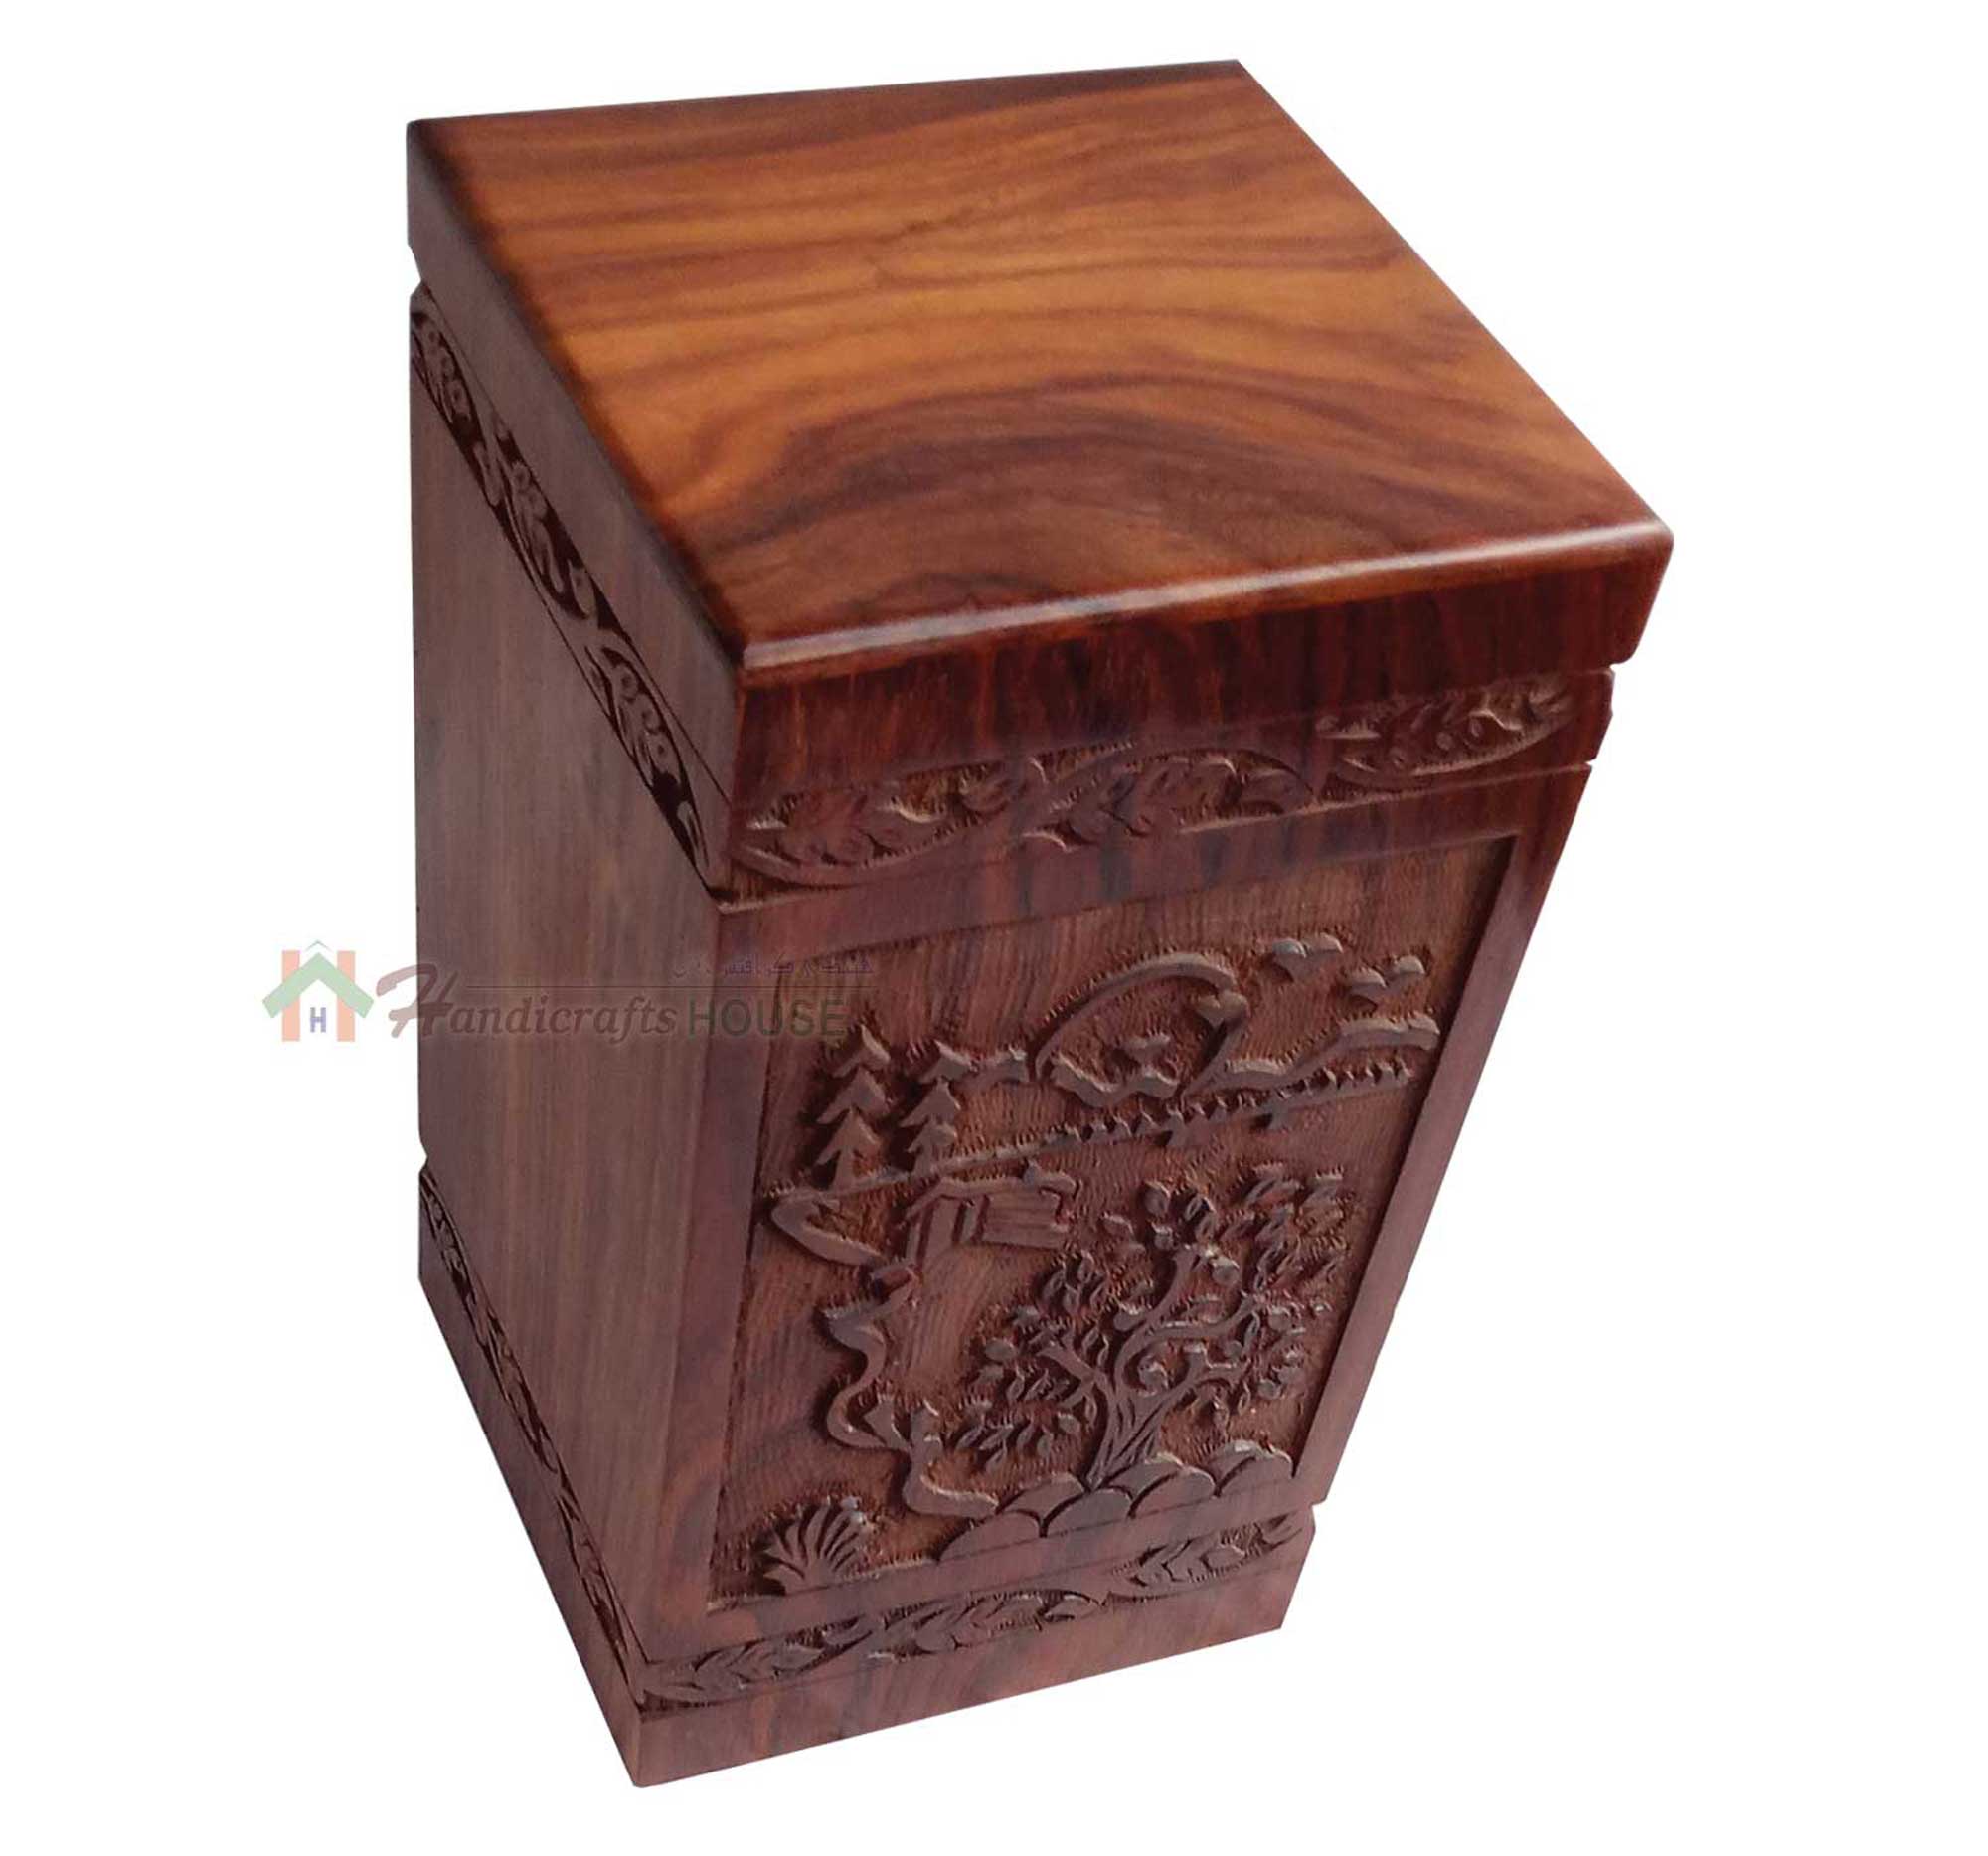 Hands Carving Wooden Cremation Urns, Solid Wood Burial Box for Human or Pet Ashes Adult - Hardwood Memorial Large Urn for Loved One